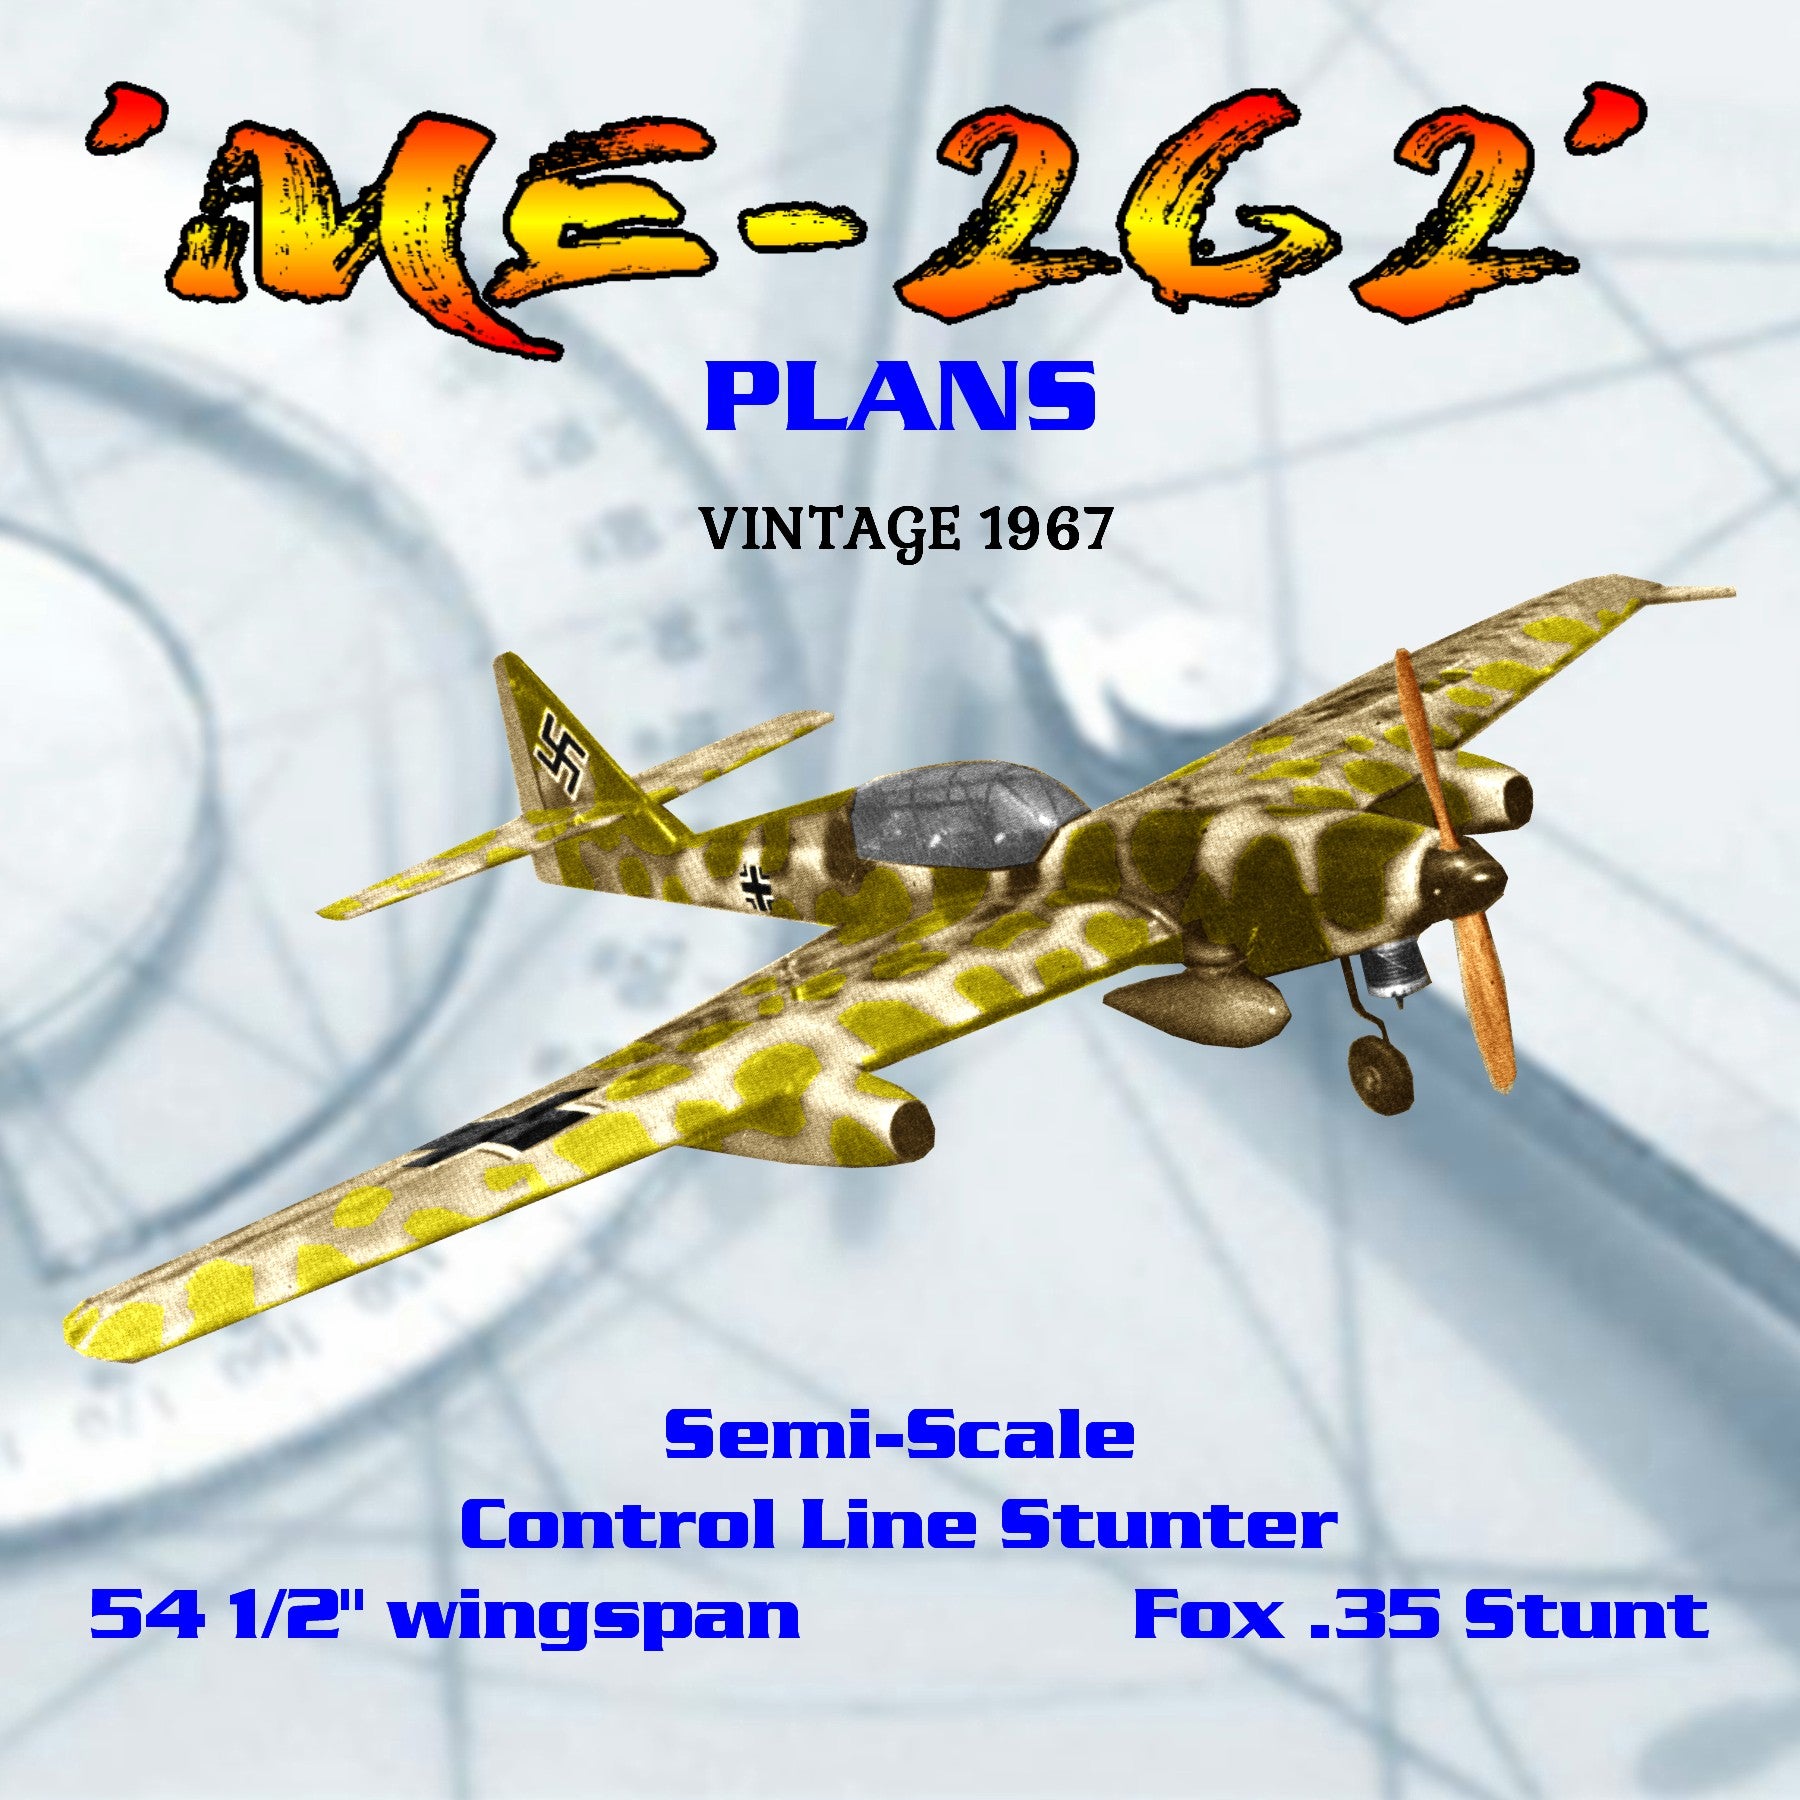 full size plans vintage 1967 semi-scale control line ‘me-262’  a realistic tighter look, why not build one?